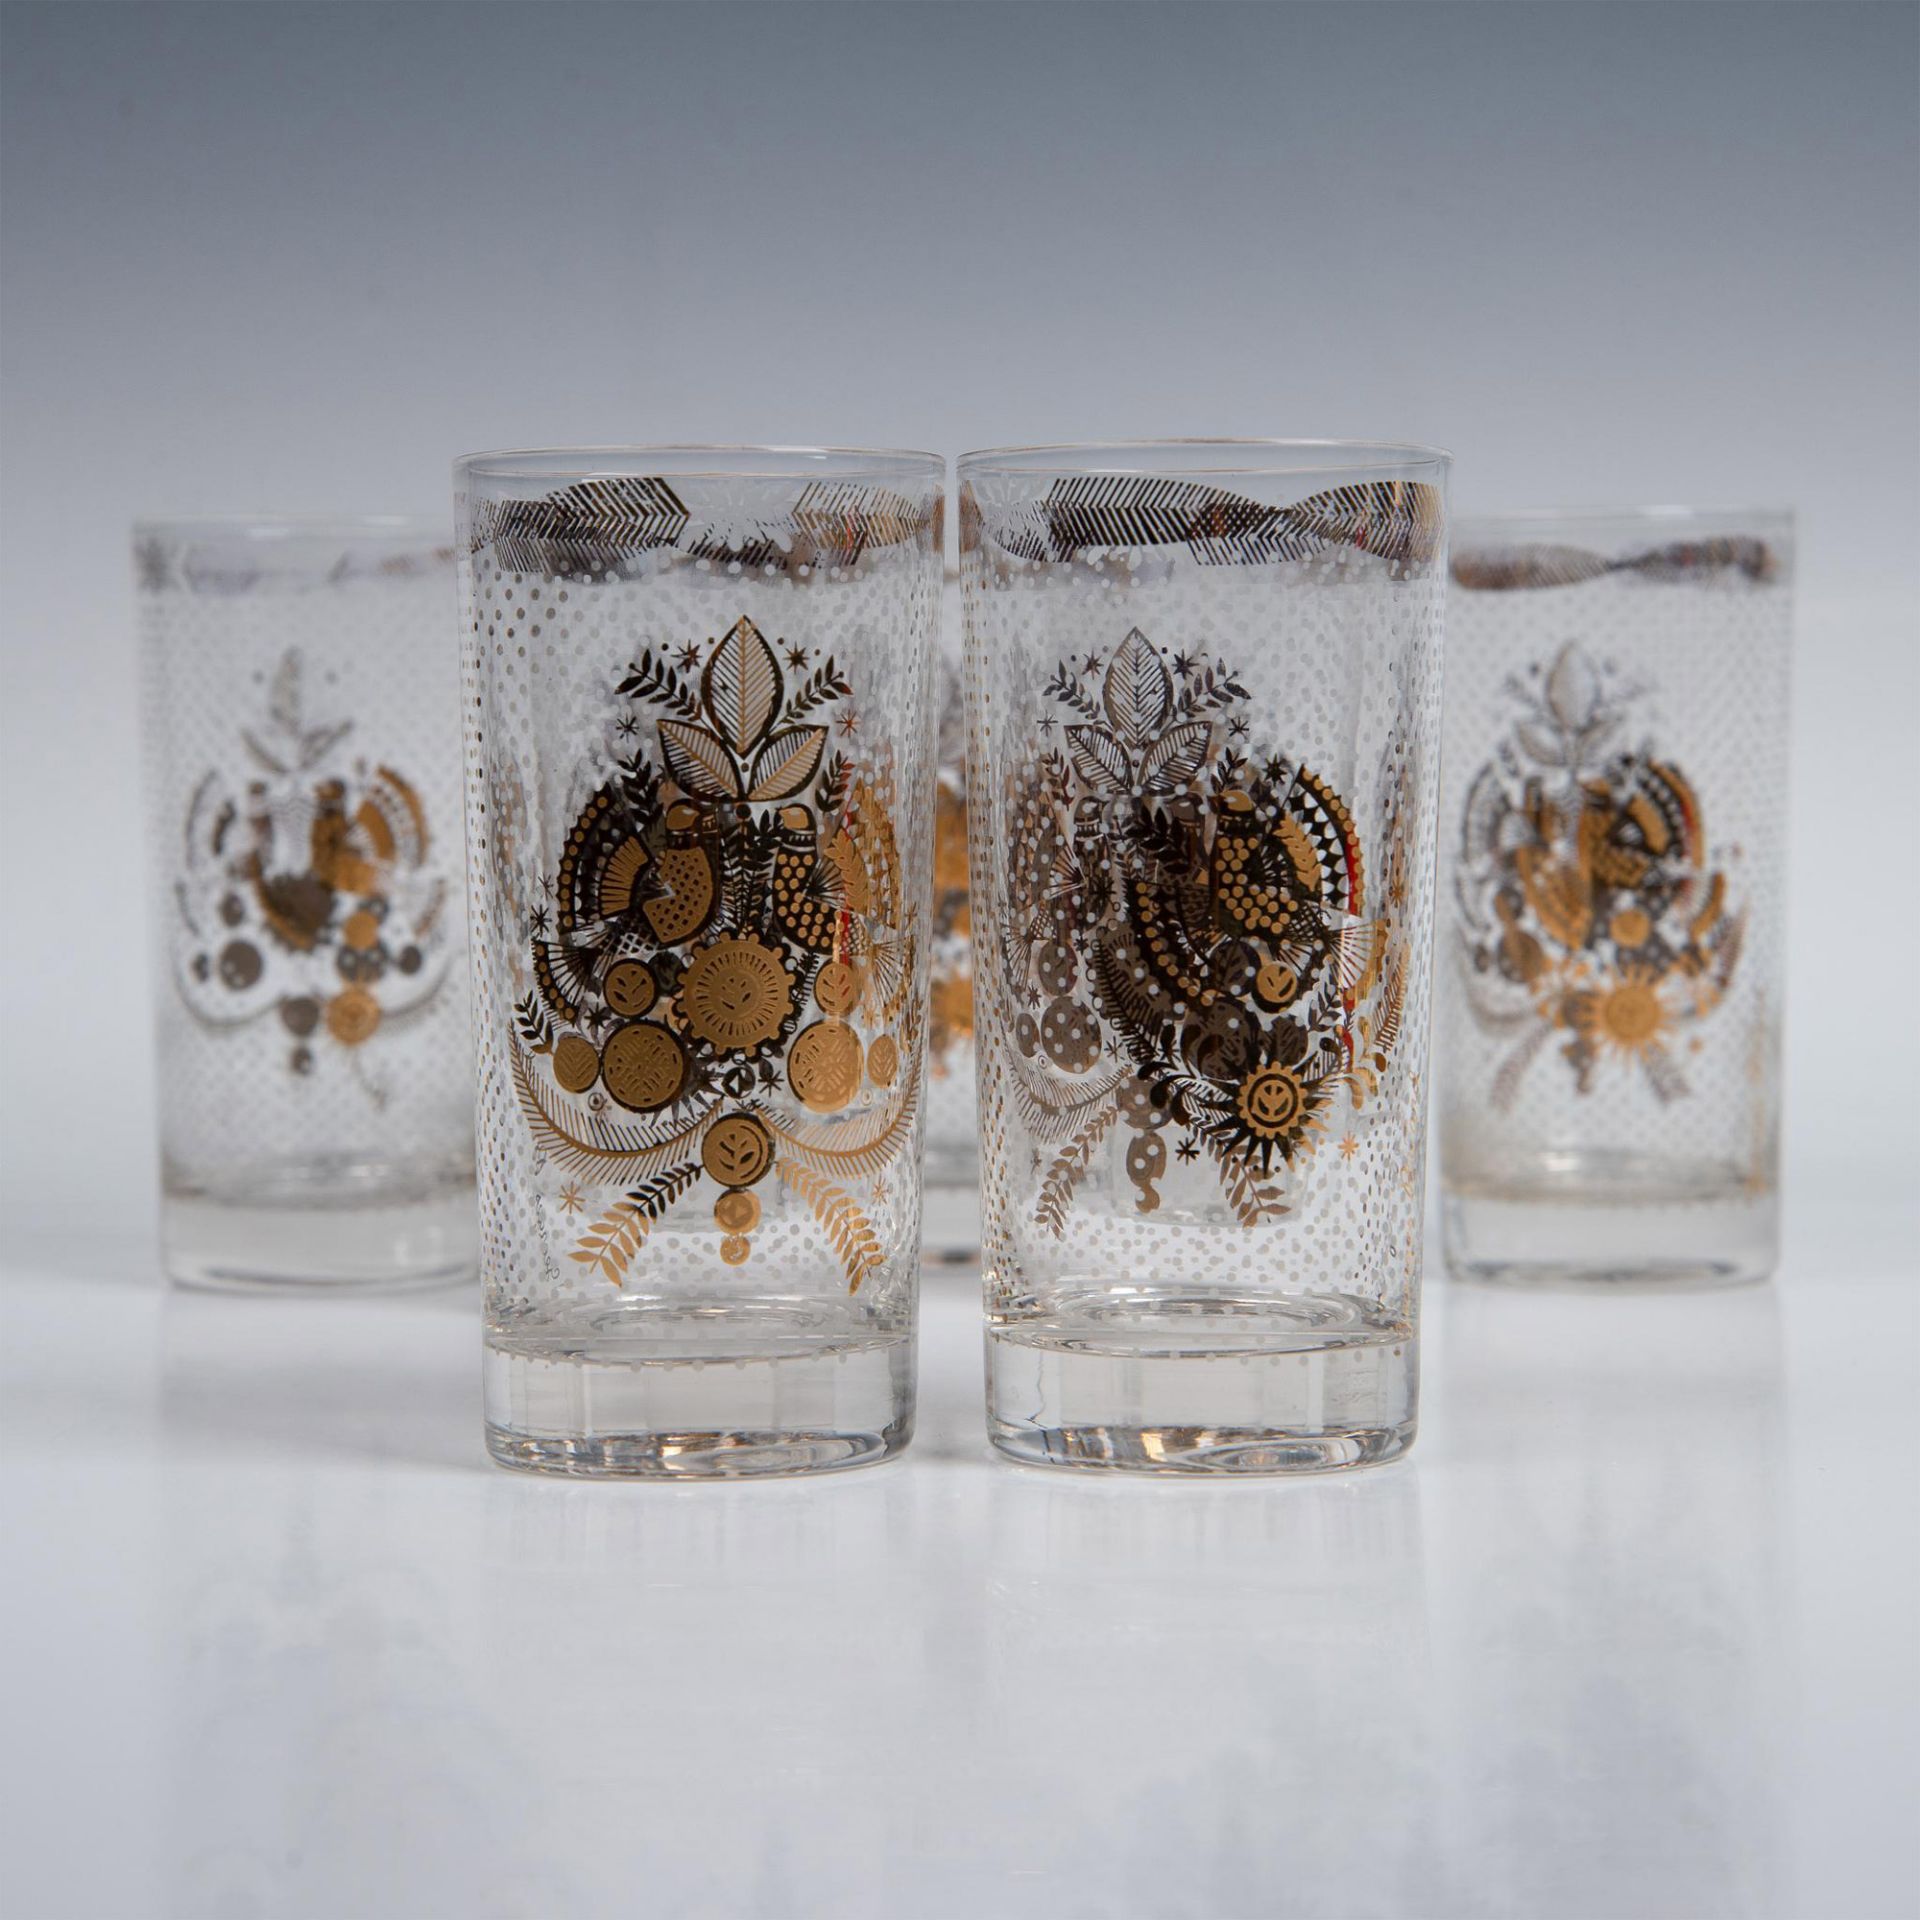 7pc Georges Briard Highball Glasses, Sonata Pattern - Image 5 of 5